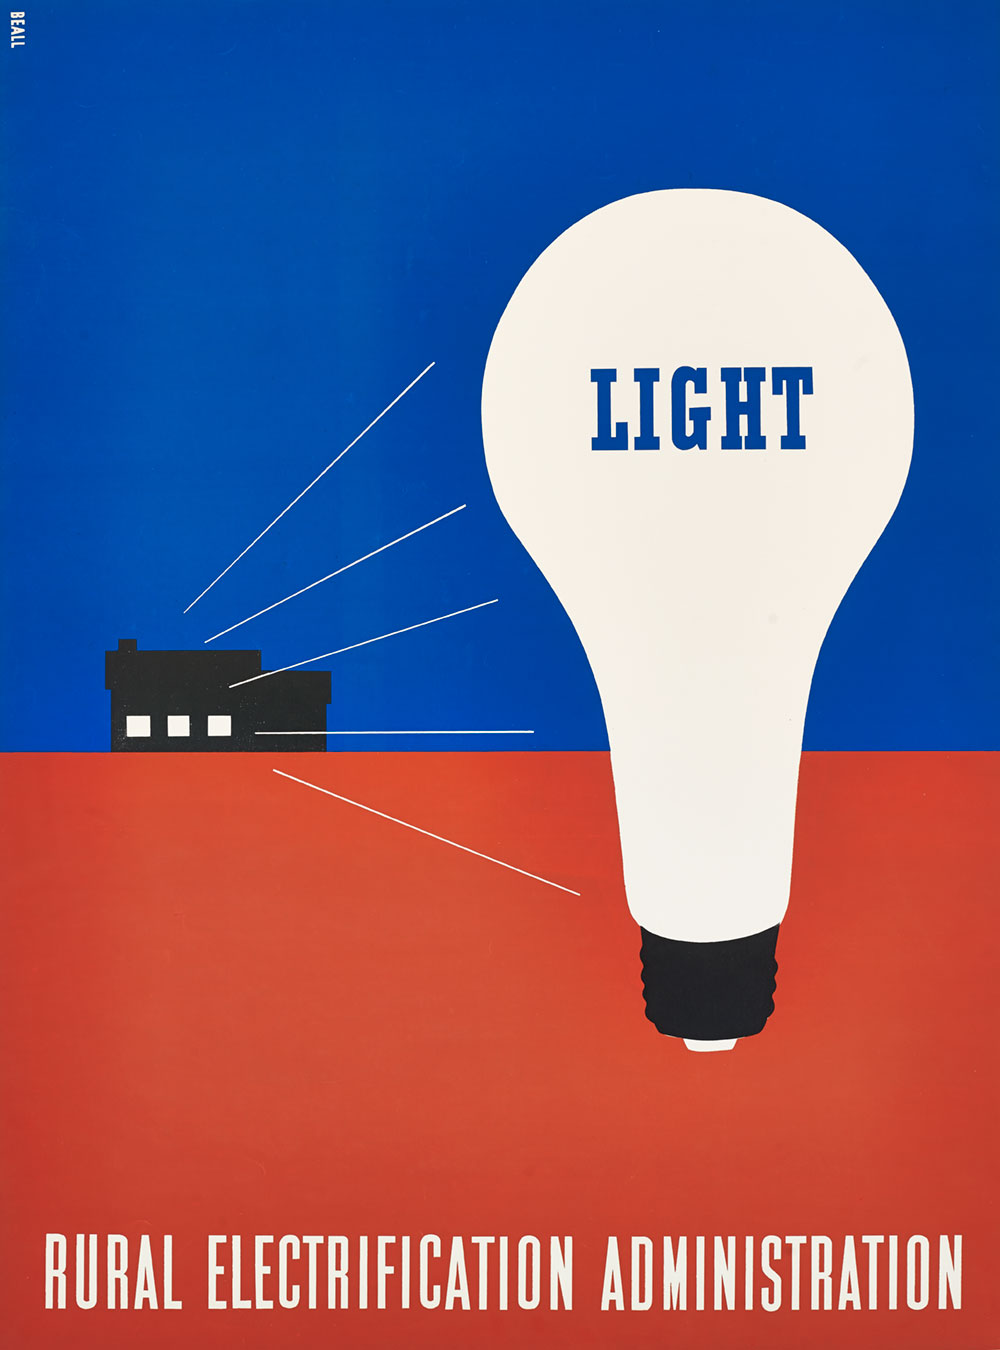 Rural Electrification Administration poster with a large white light bulb